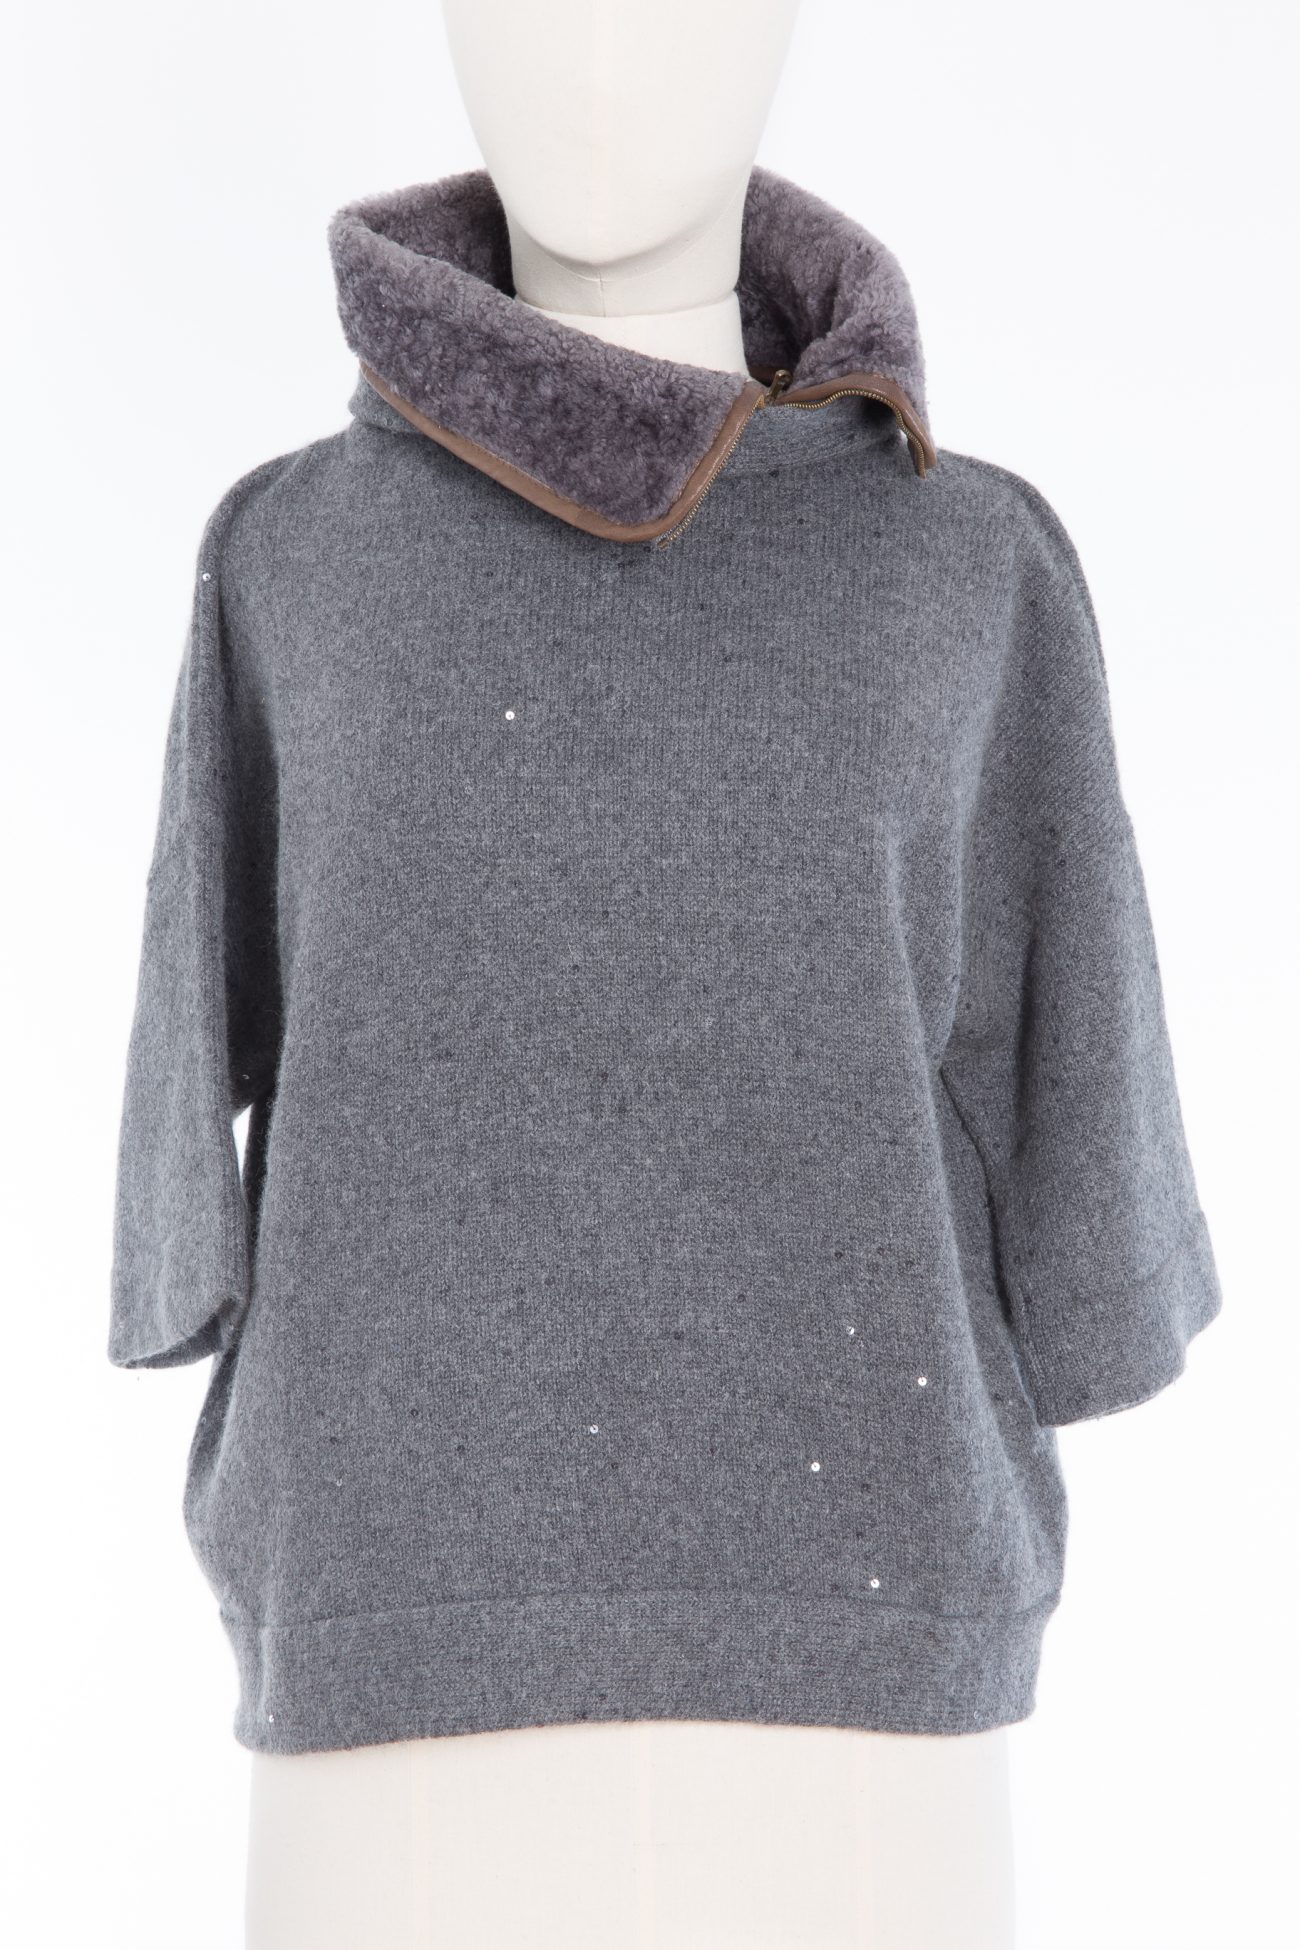 Brunello Cucinelli sweater with shearling collar